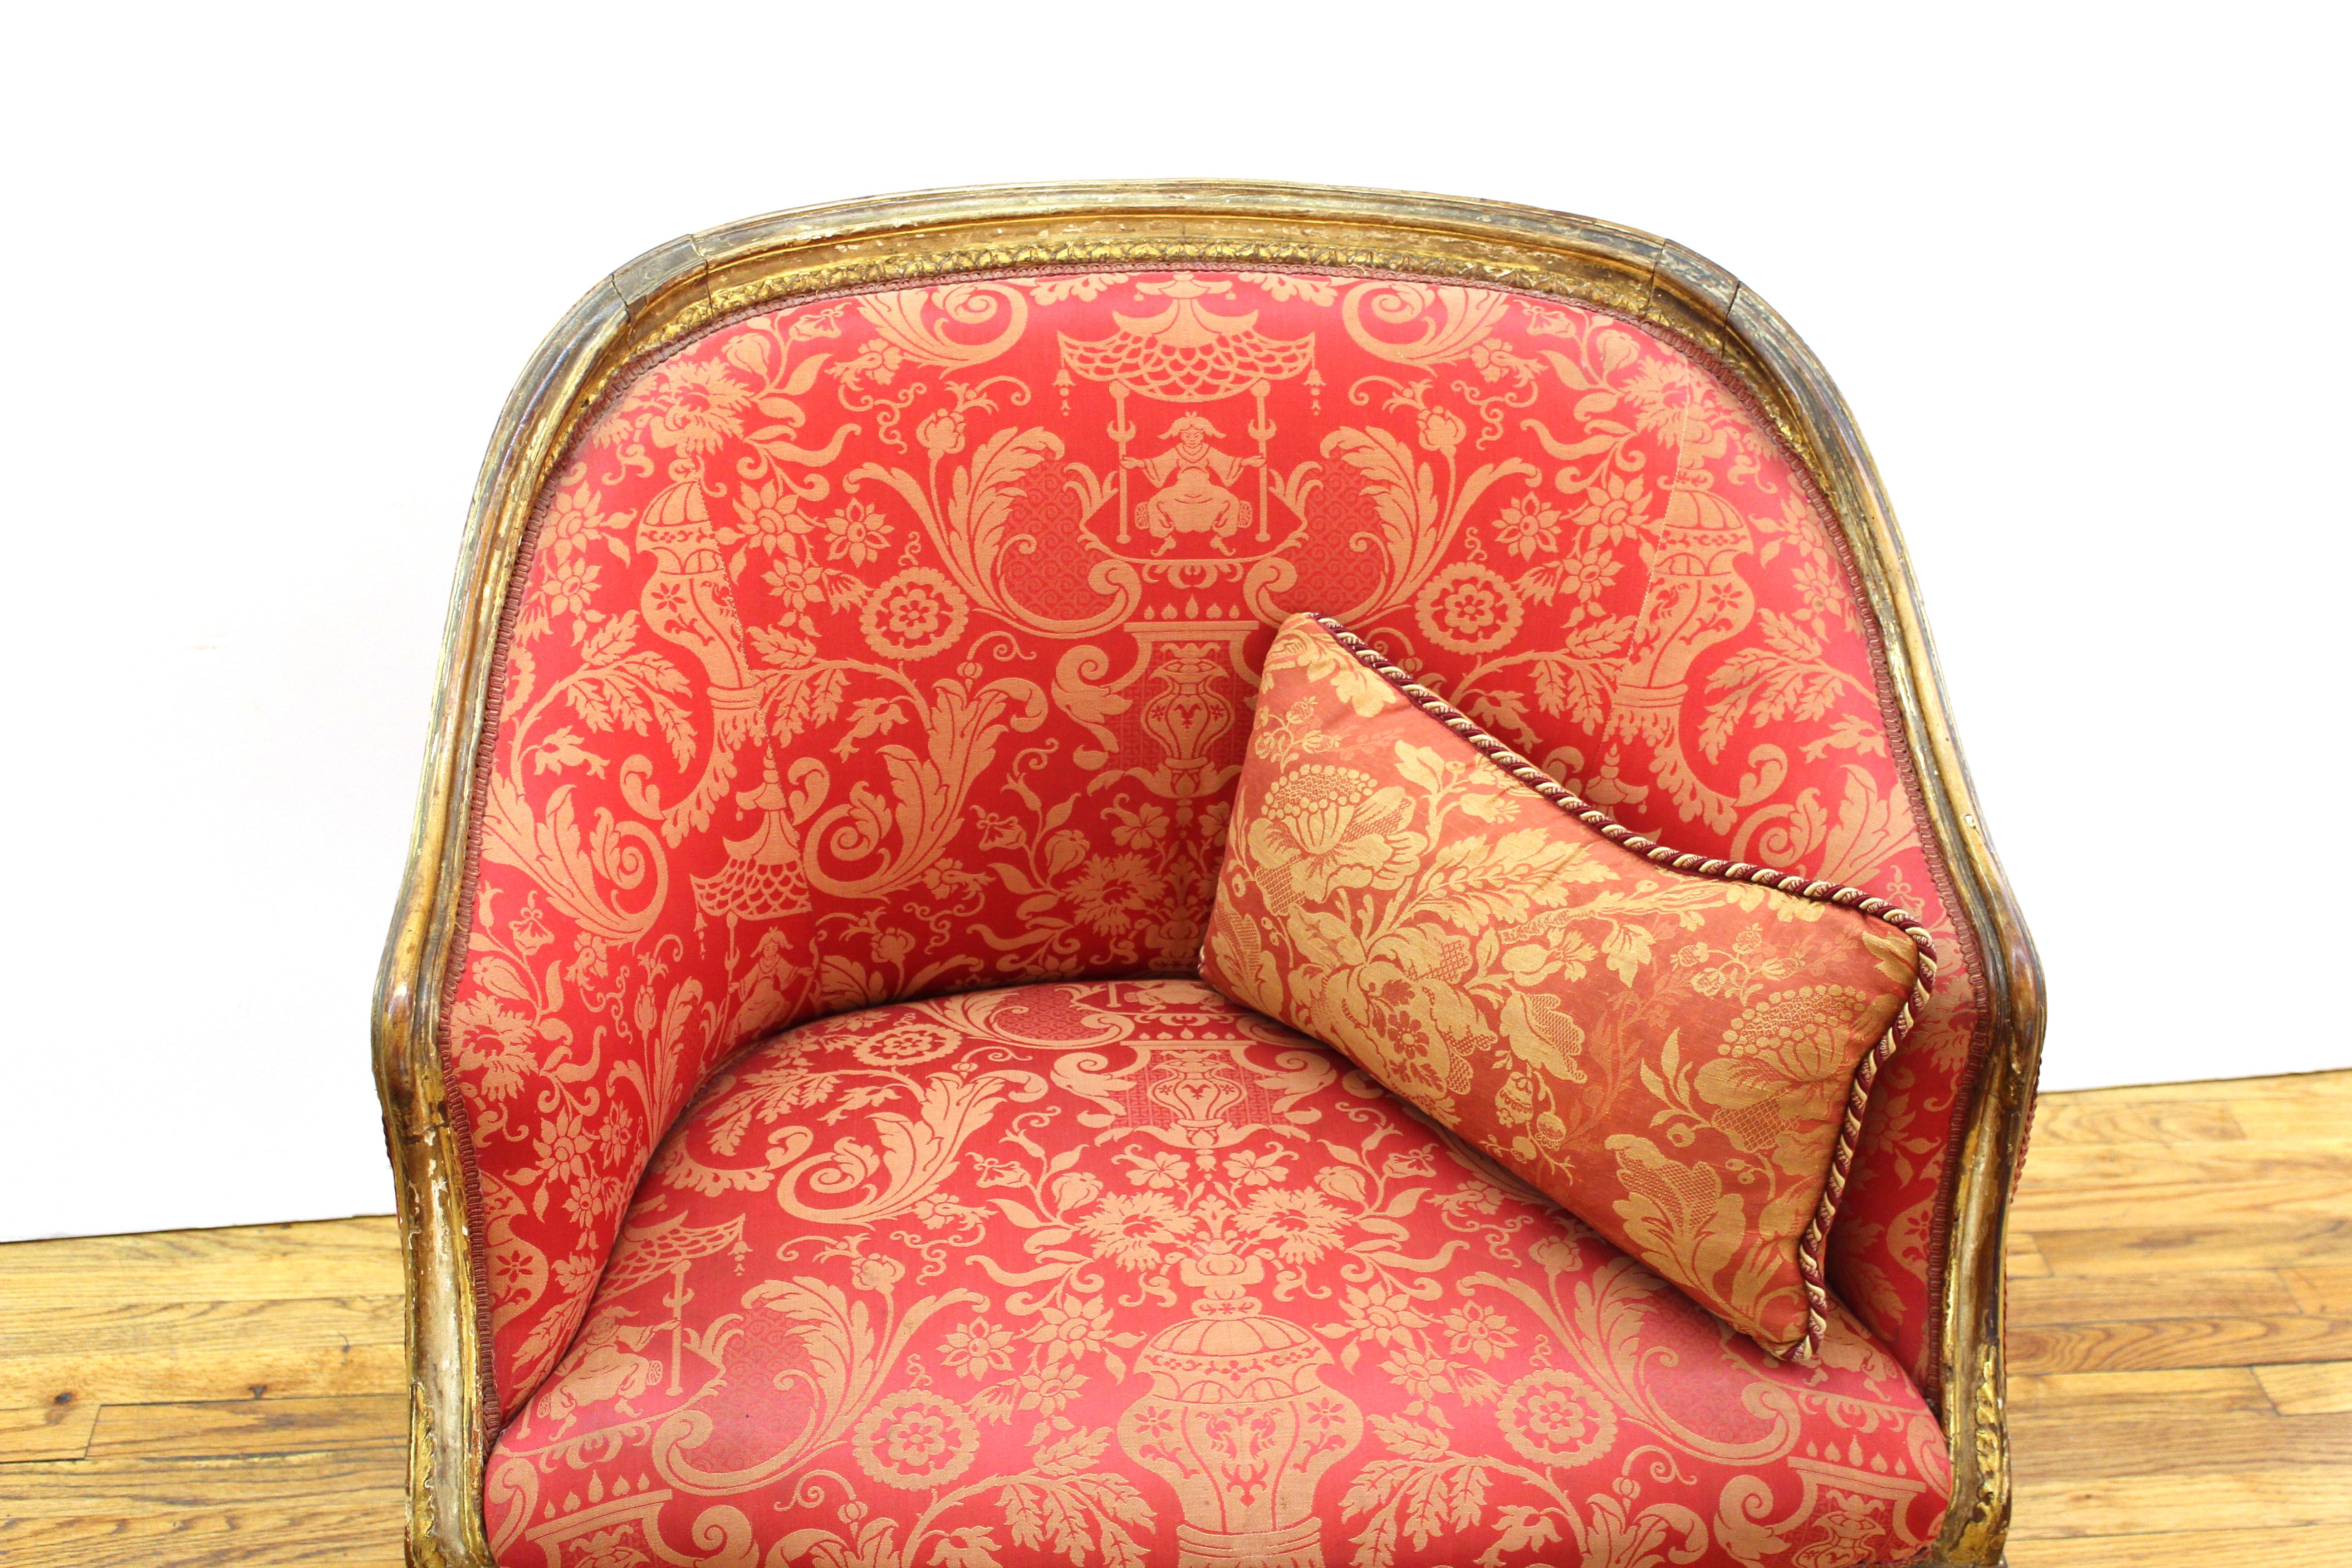 European Louis XVI Style Giltwood Fauteuil with Damask Upholstery